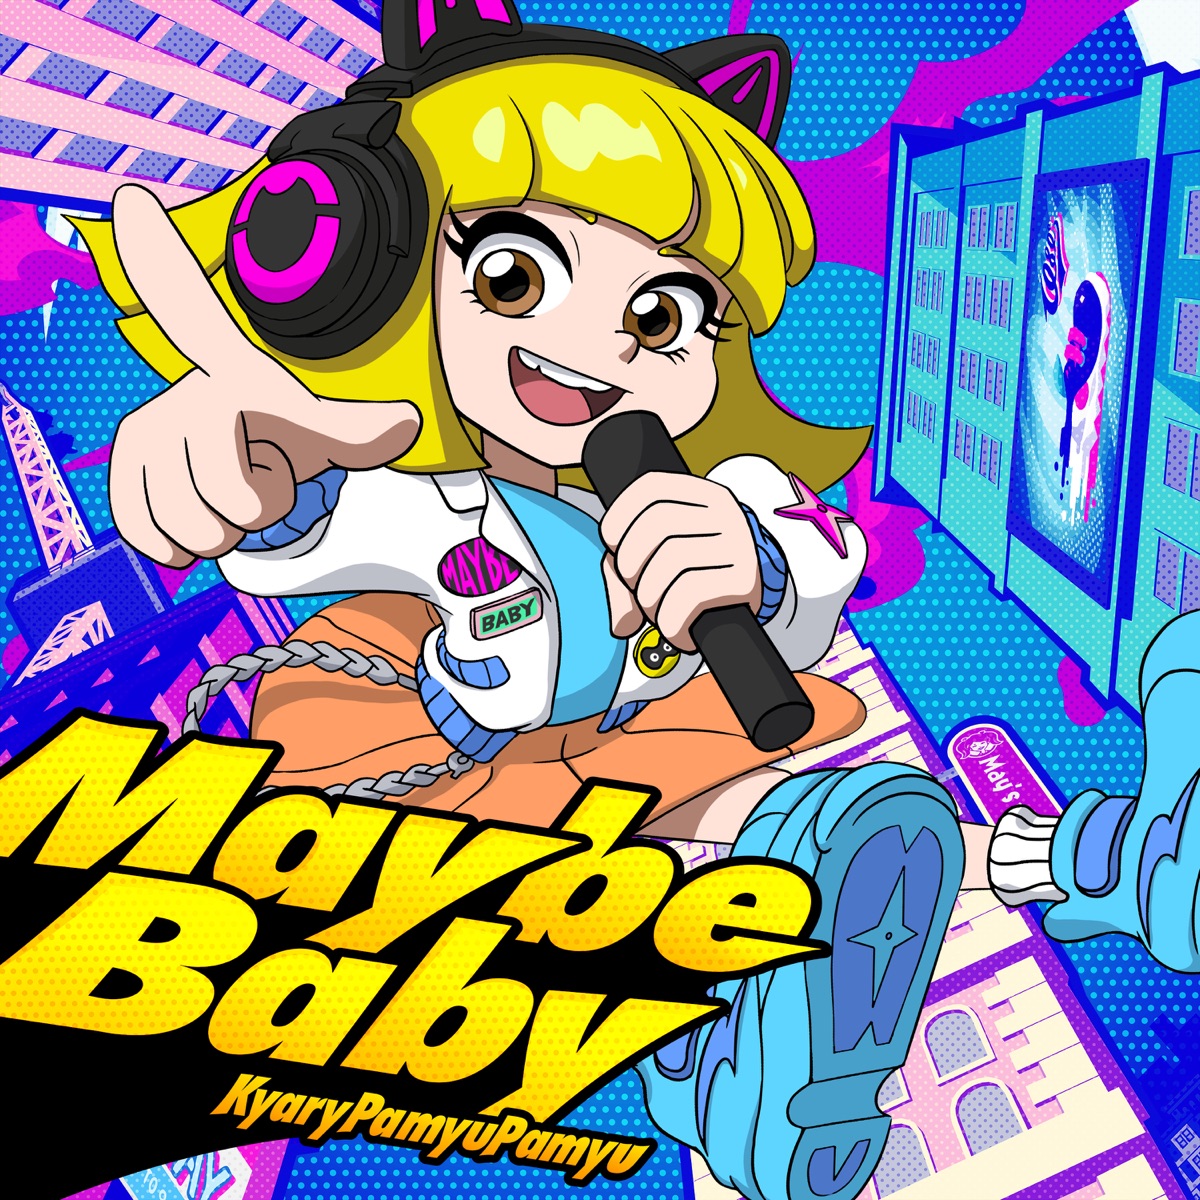 Cover art for『Kyary Pamyu Pamyu - Maybe Baby』from the release『Maybe Baby』